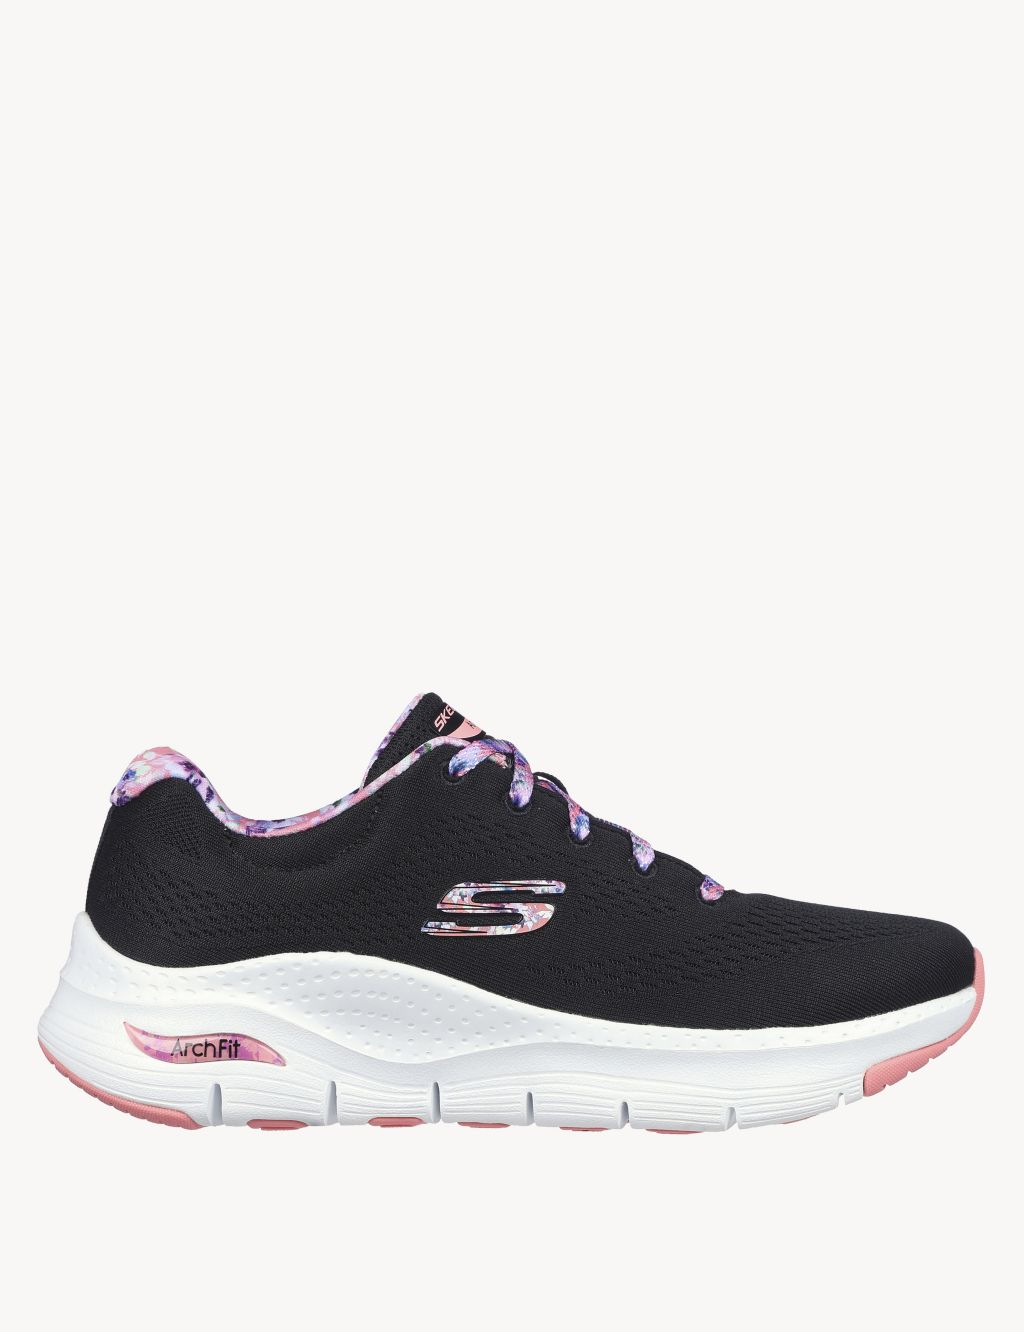 Arch Fit First Blossom Lace Up Trainers image 1